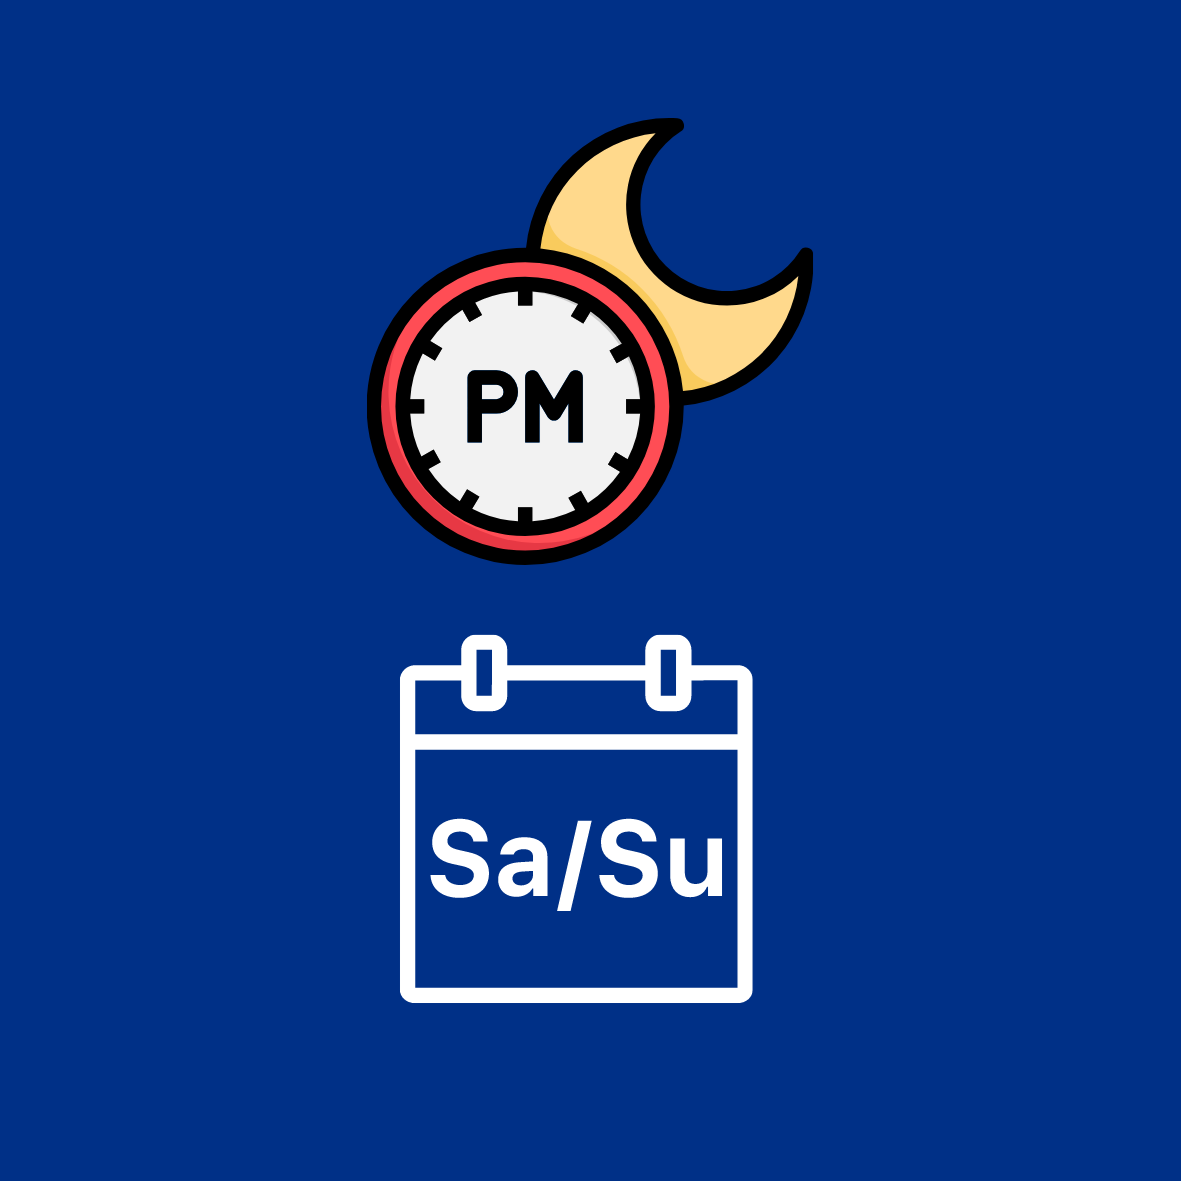 Image of Moon and Clock with Letters 'PM' and Calendar with Saturday and Sunday to Represent the Weekend